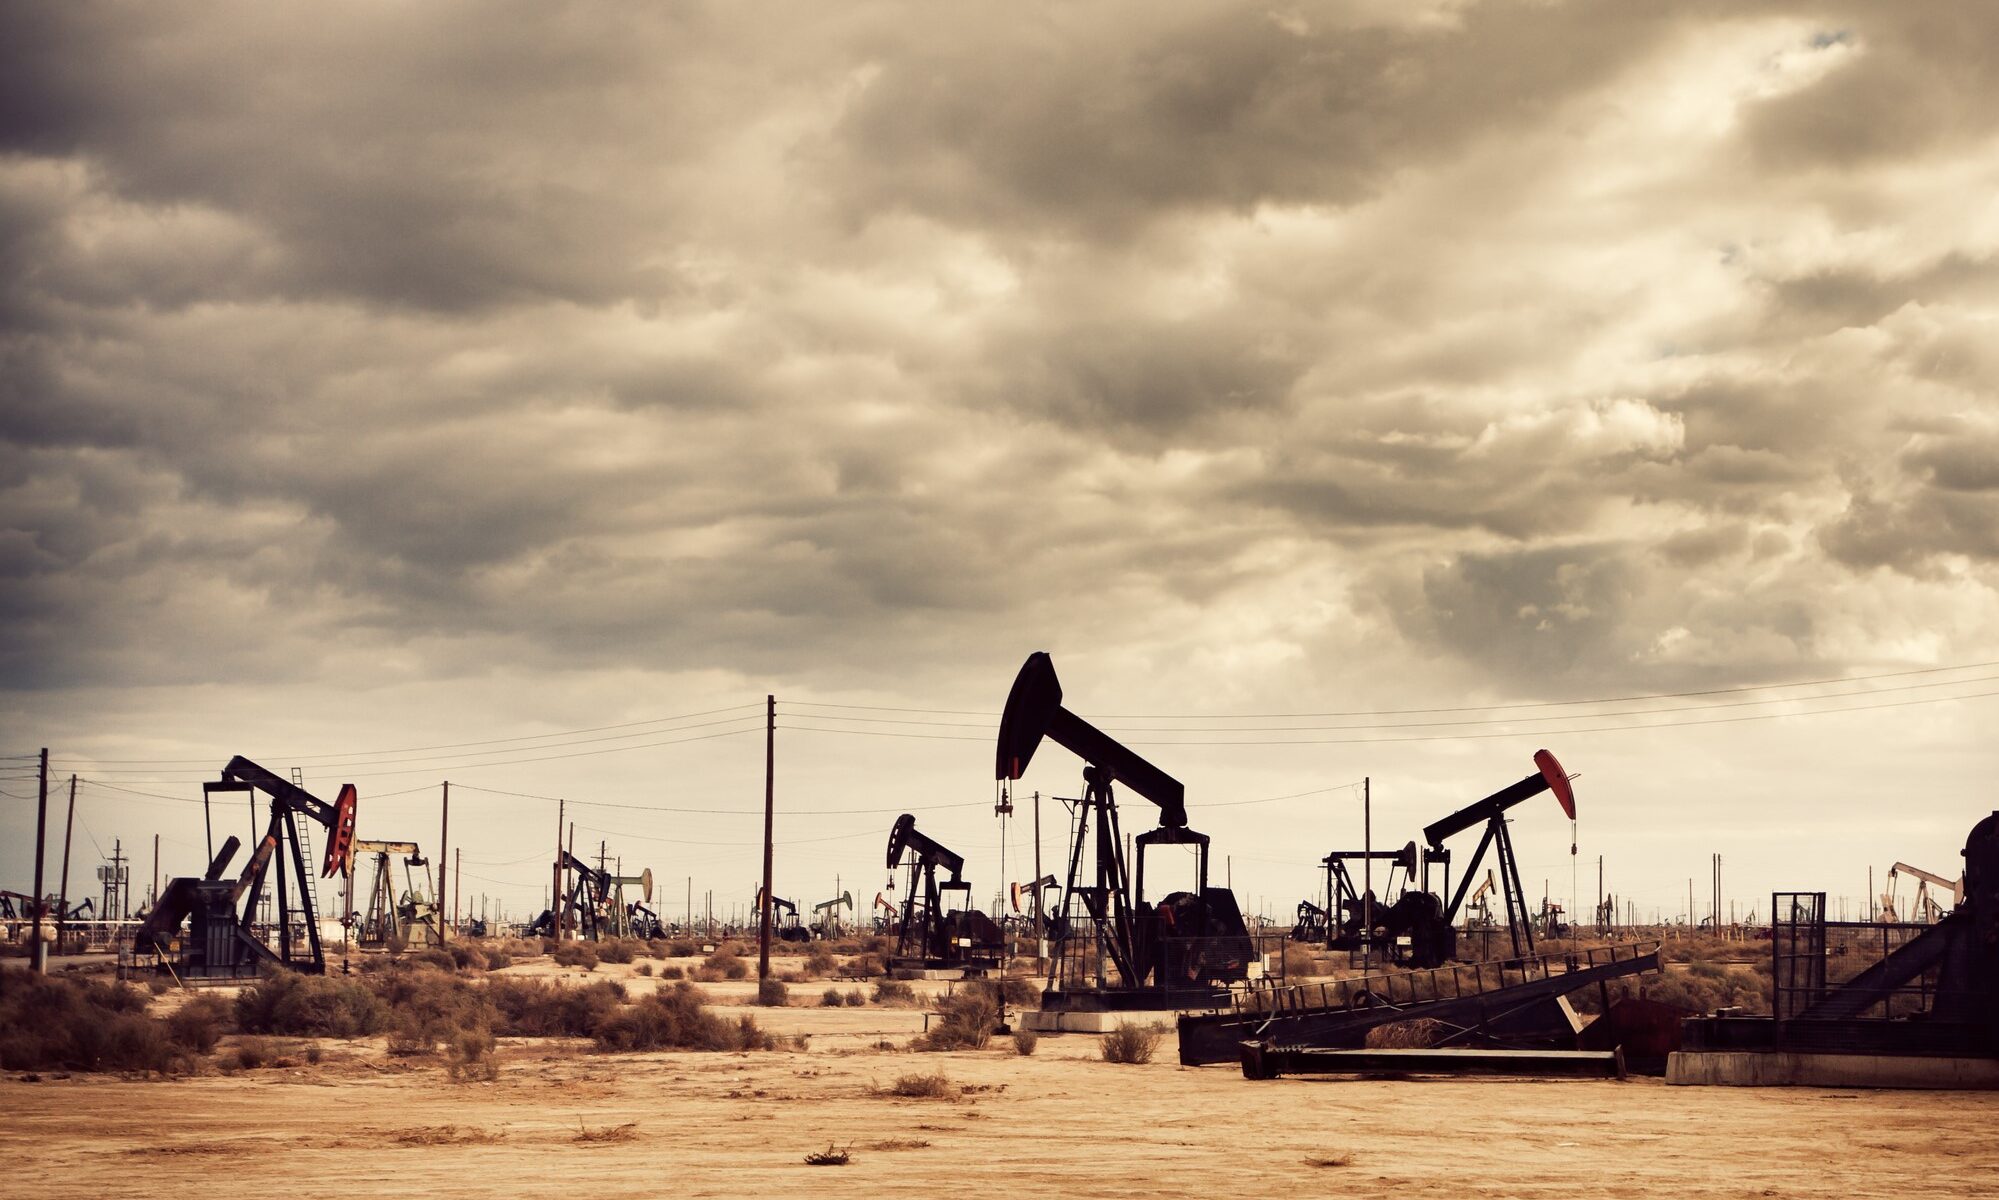 photograph of oil pumps in the desert